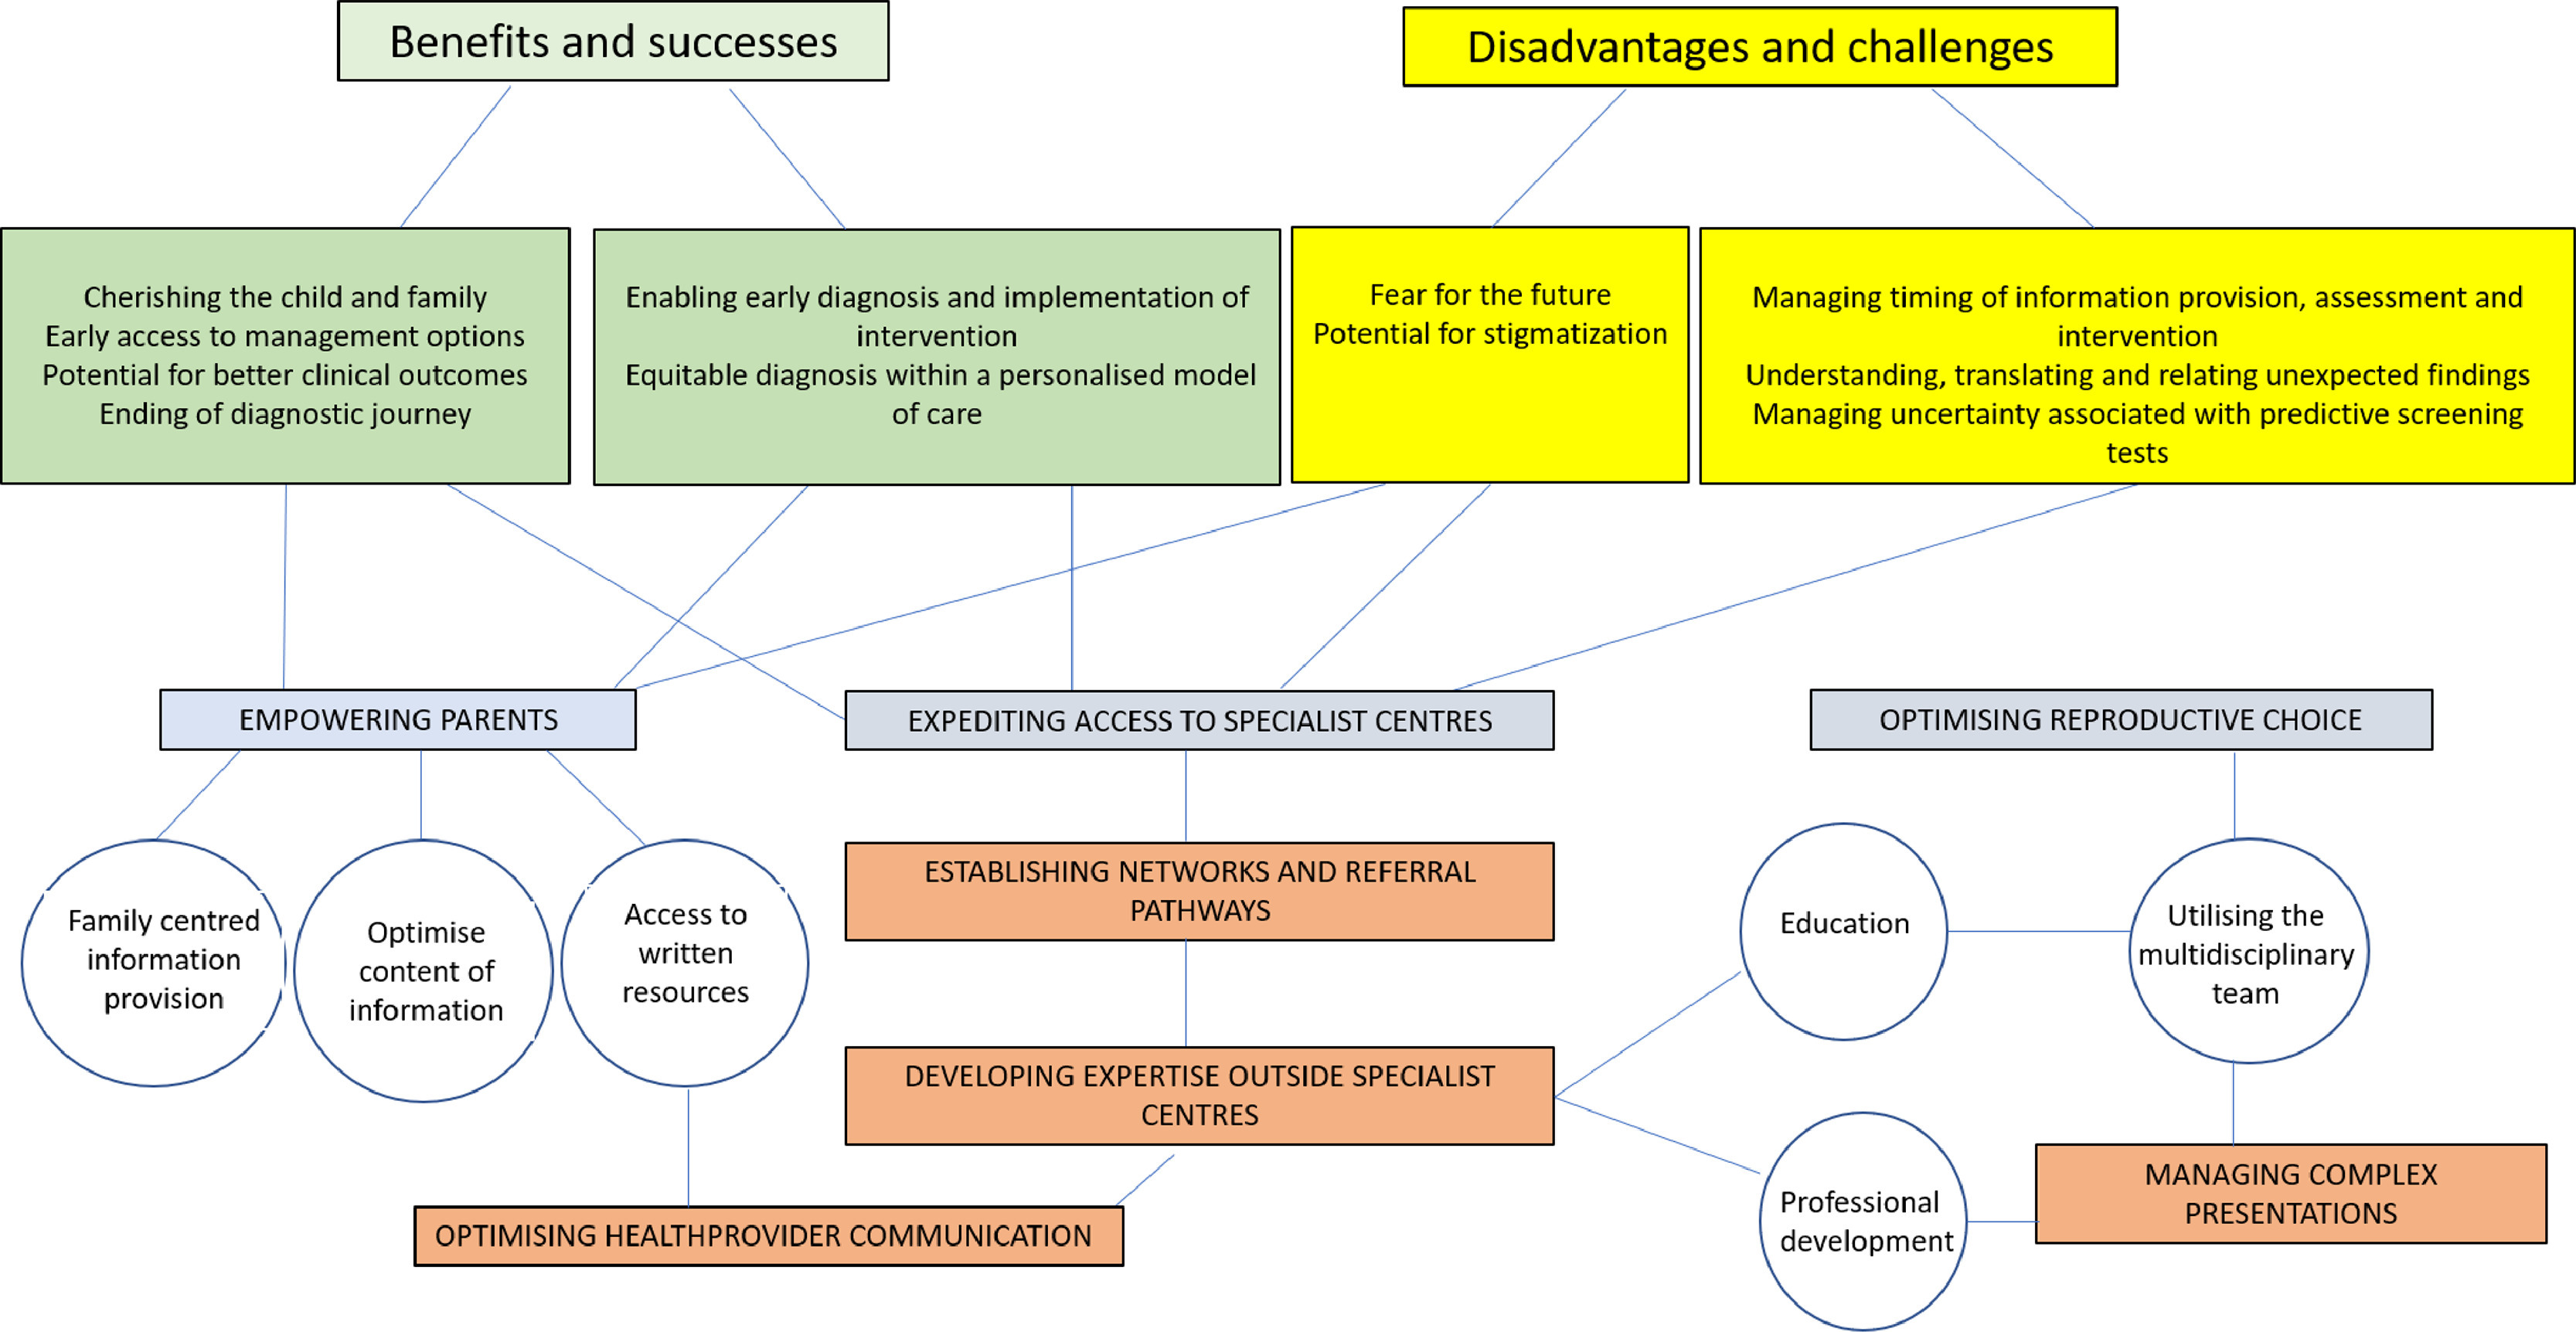 A thematic map displaying the interactions between perceptions and recommendations for parents’ and healthcare professionals involved in the newborn screening program for spinal muscular atrophy.